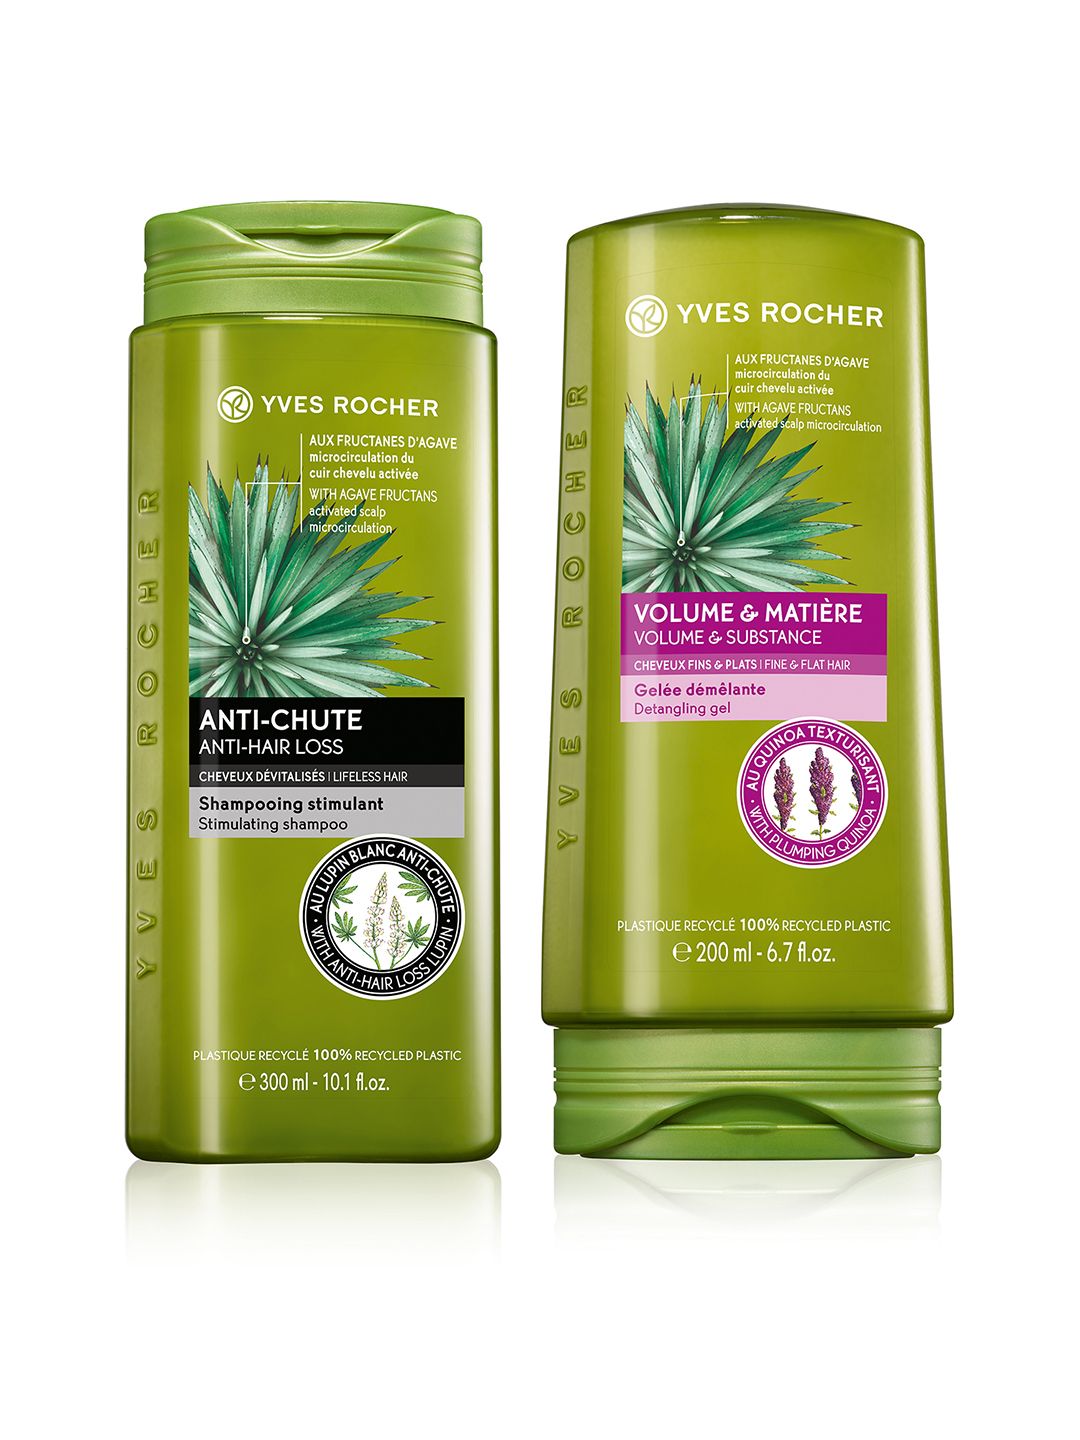 YVES ROCHER Set of Sustainable Anti-Hair Loss Shampoo & Volume & Substance Detangling Gel Price in India